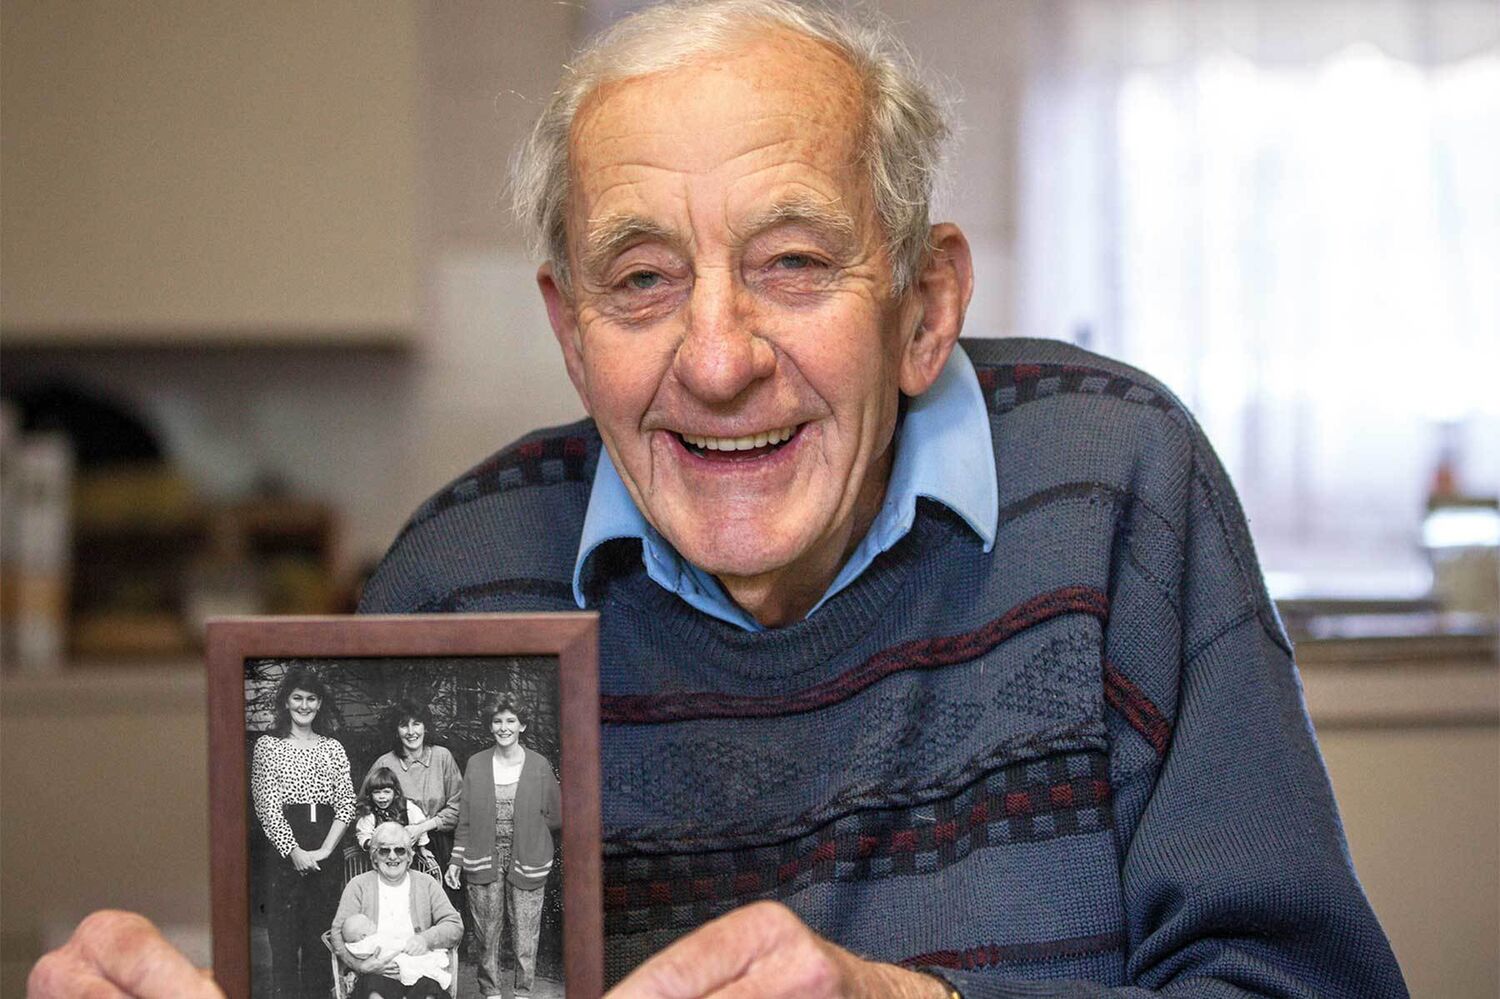 Peter Holding A Photo Of His Family